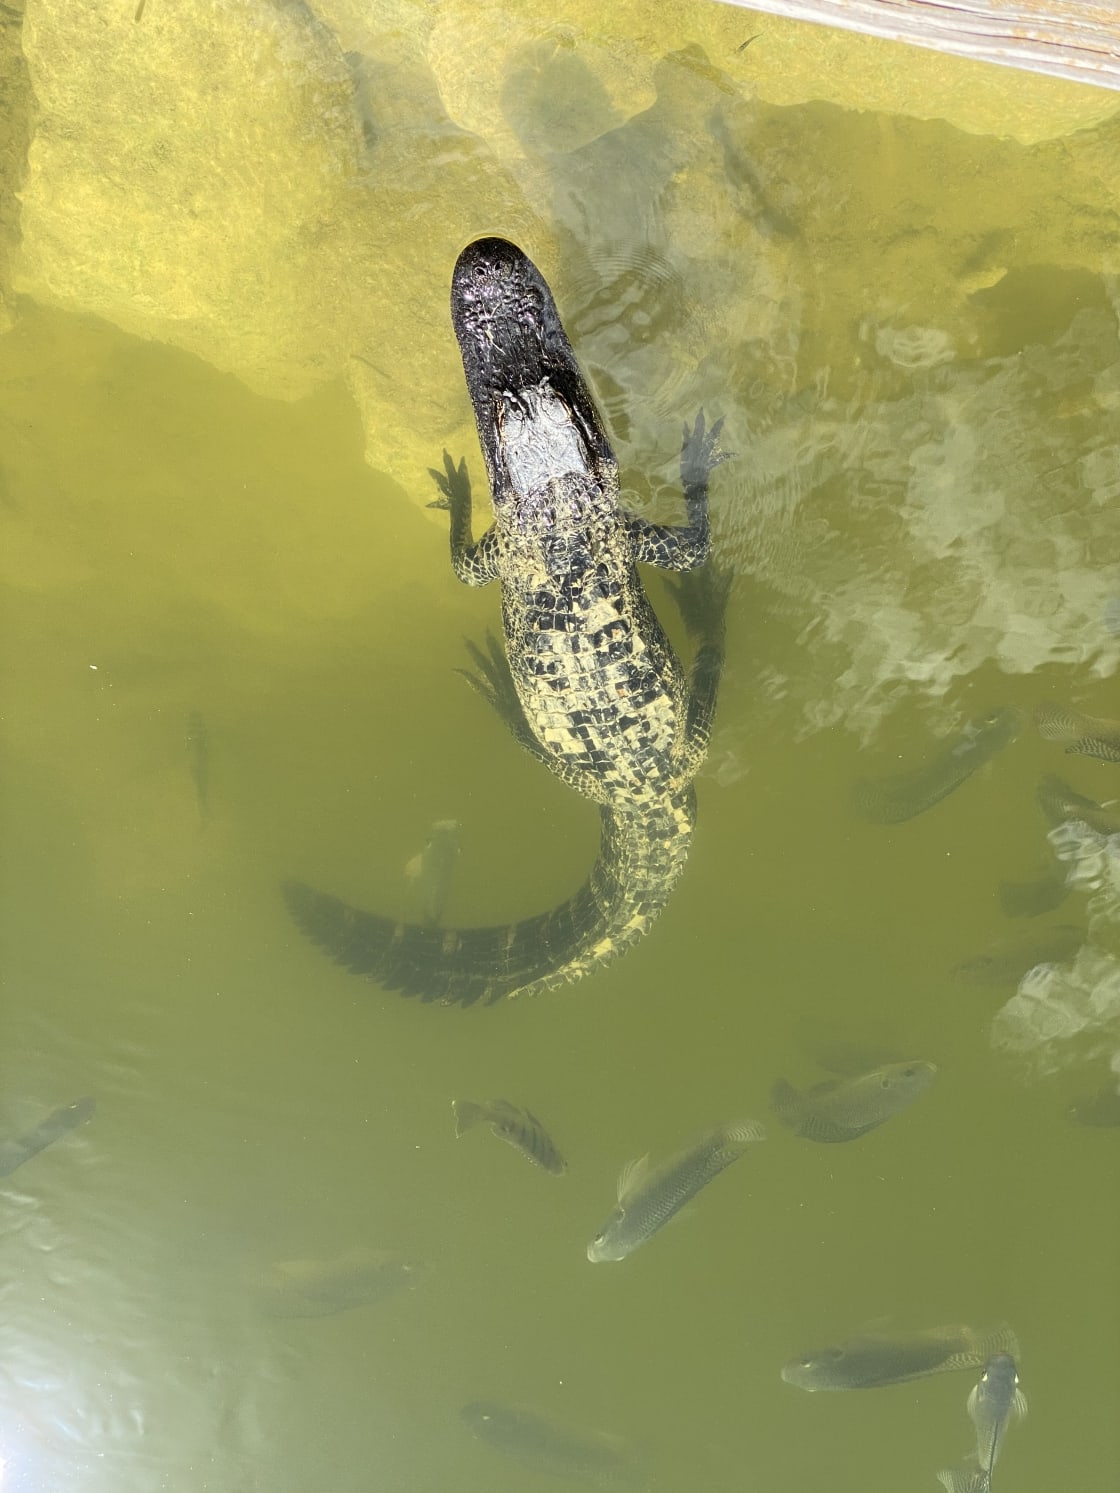 One of the small gators that hang out in the pond!